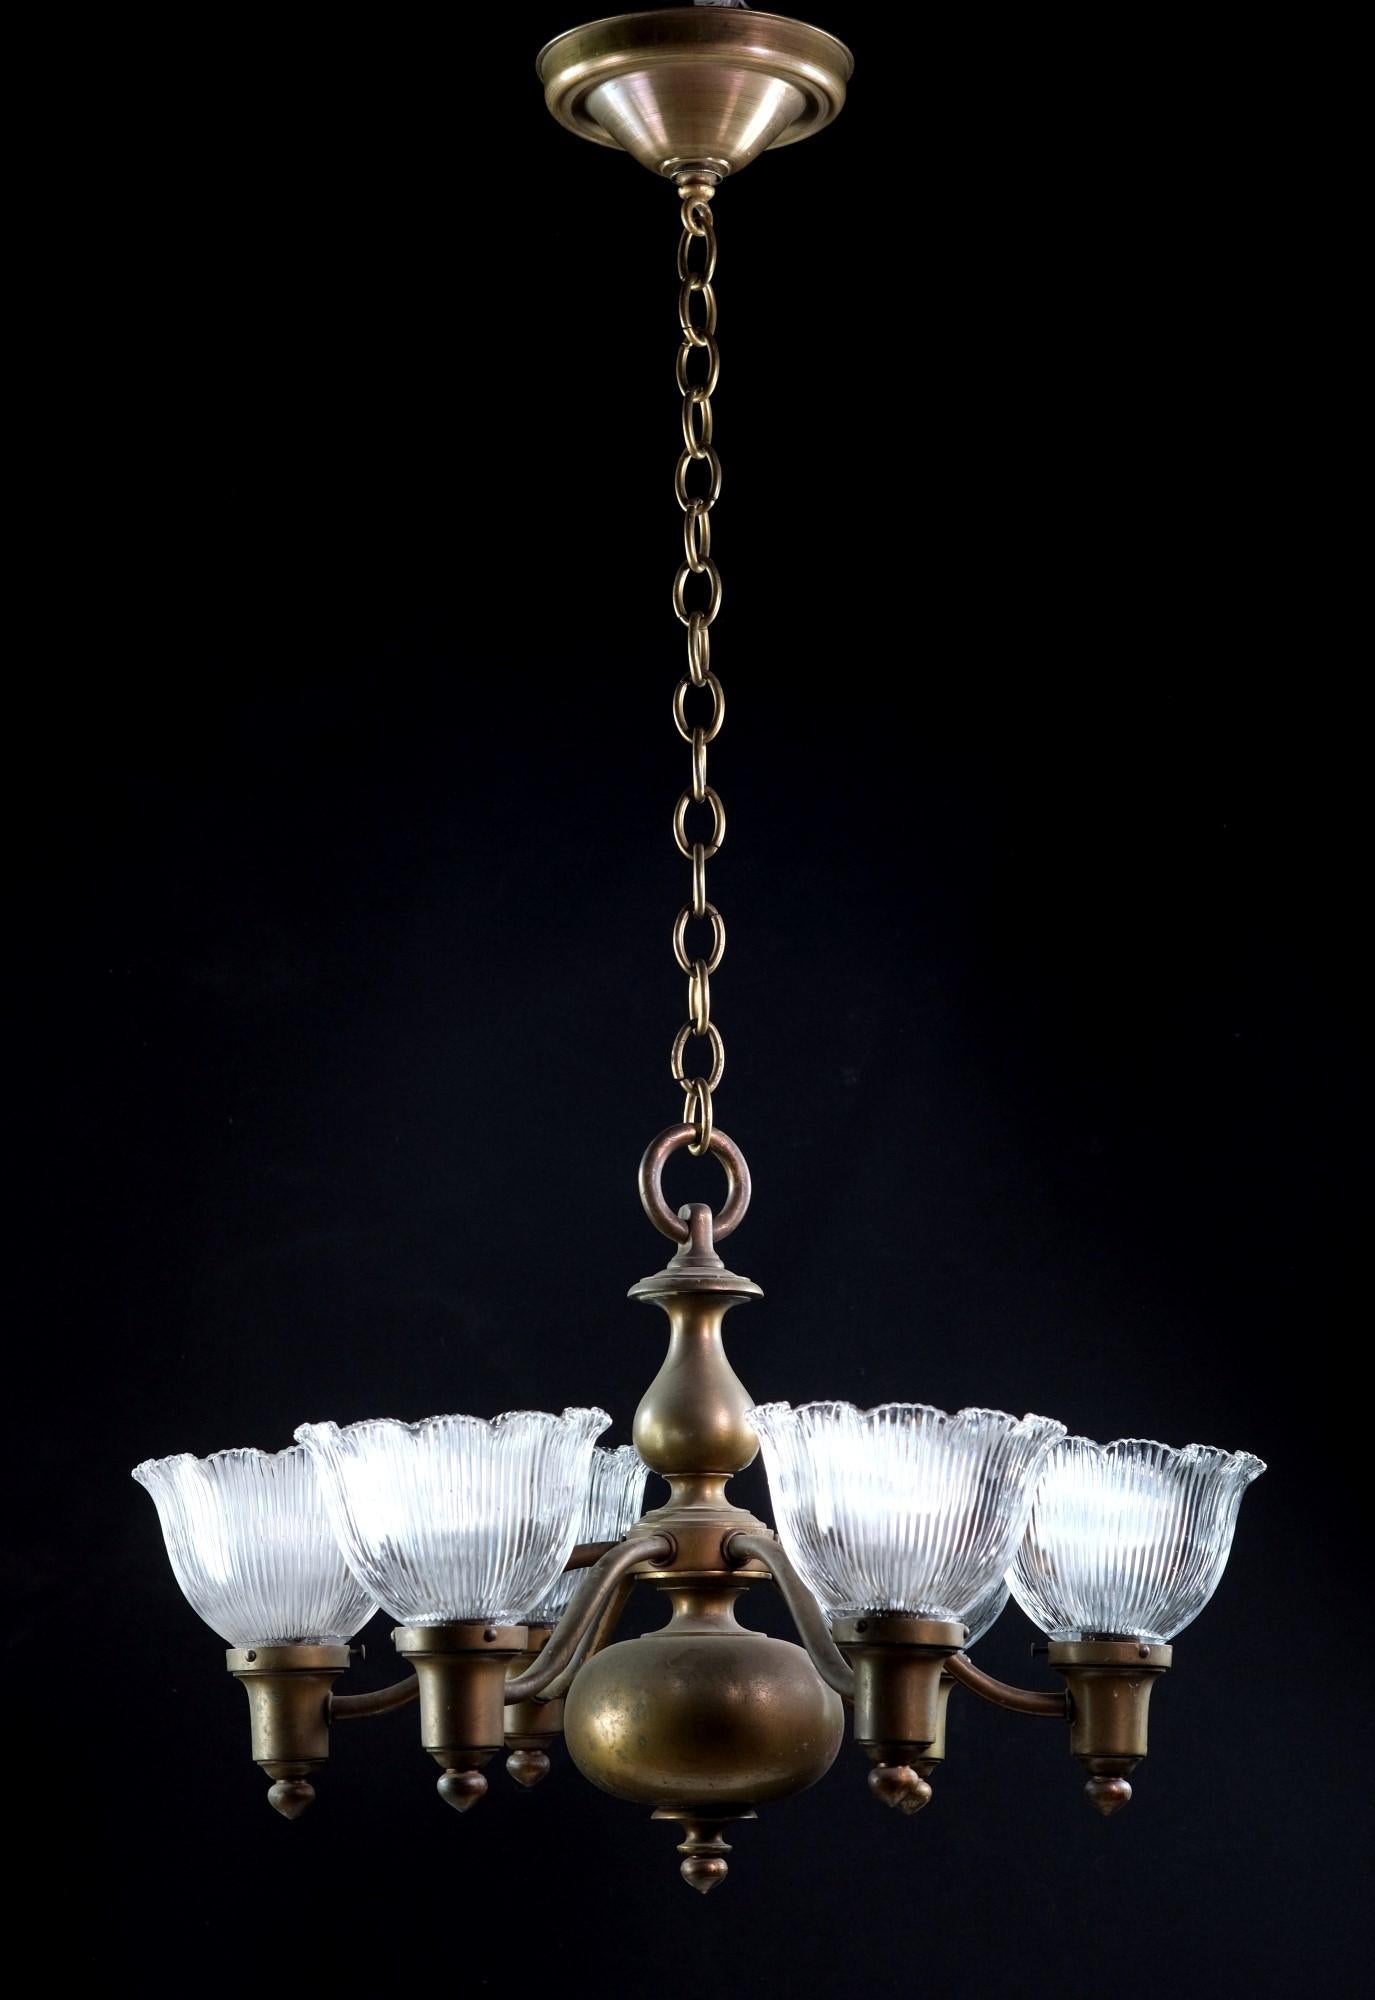 Heavy cast bronze pendant light with original patina and ruffled holophane glass shades. This chandelier is original to the 1910's and consists of 6 lights which come rewired. The price includes cleaning and rewiring while leaving the natural deep